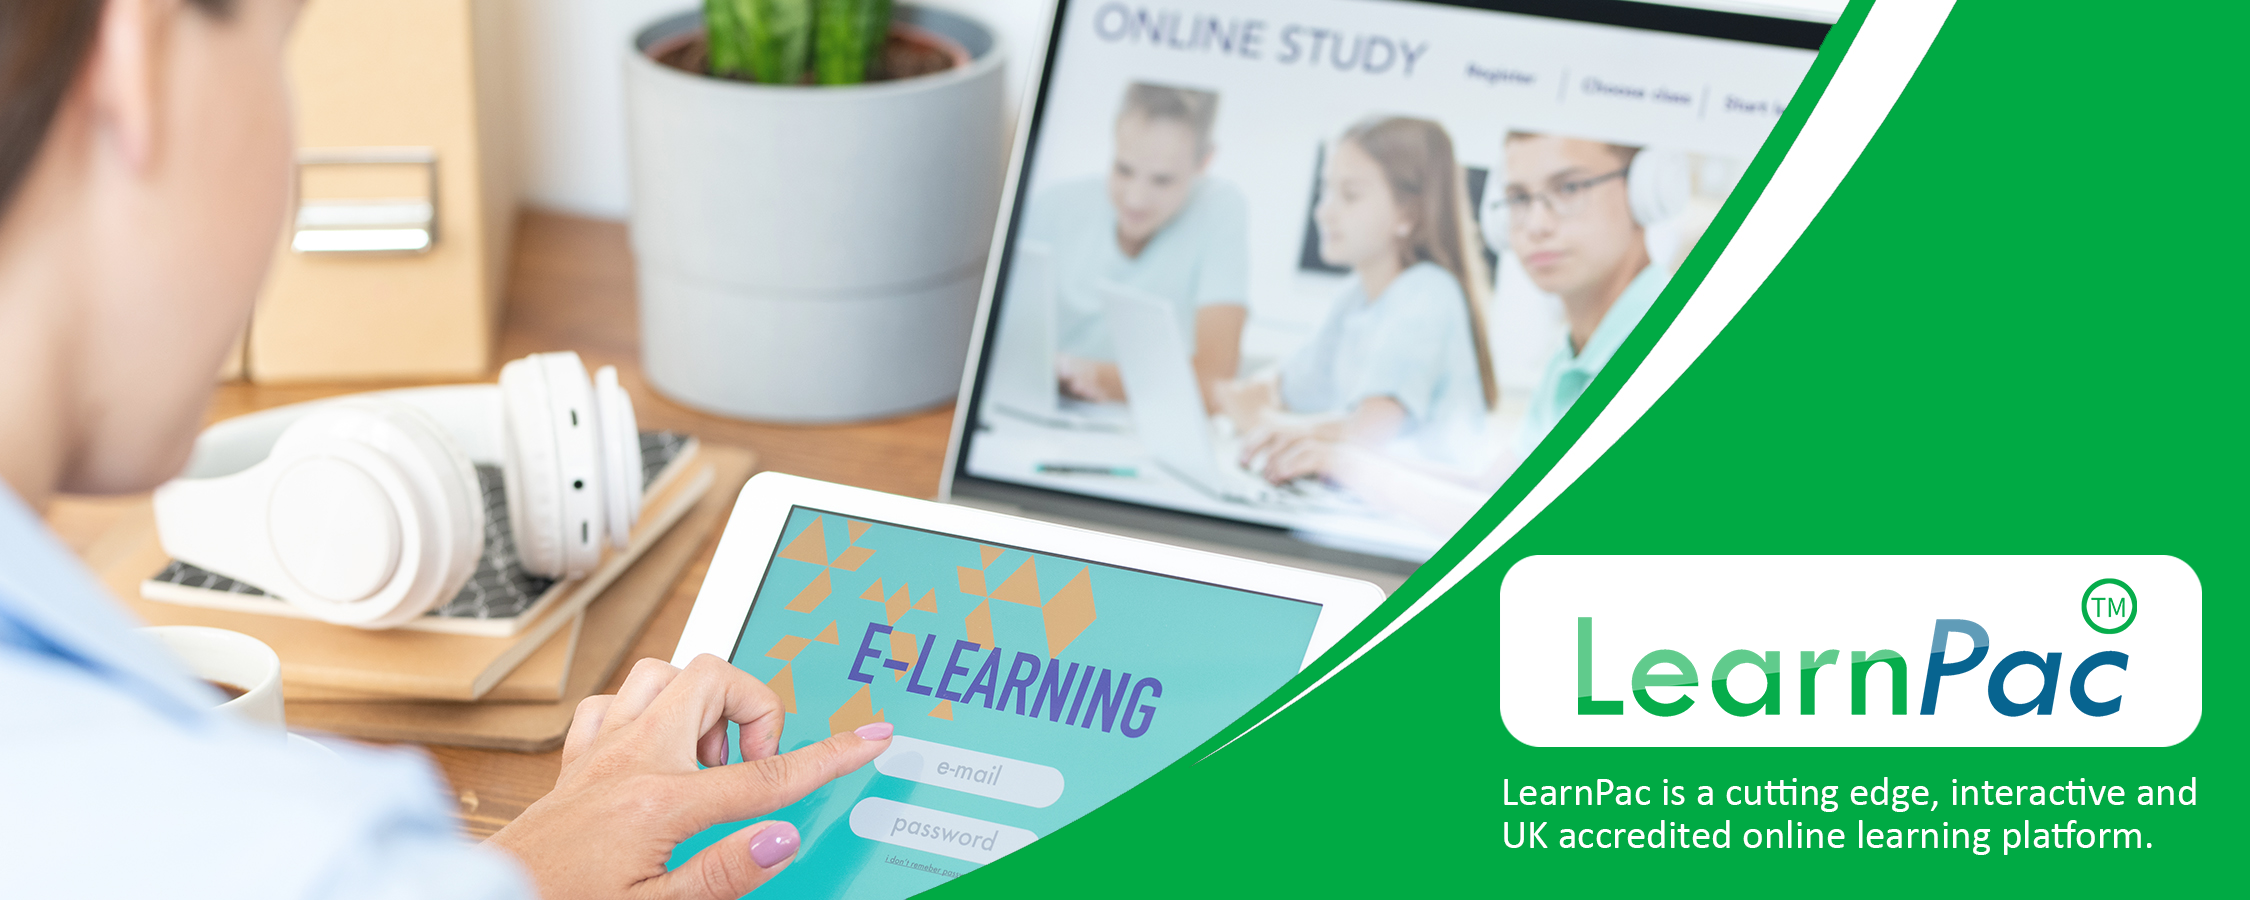 GDPR for Health and Social Care - Online Learning Courses - E-Learning Courses - LearnPac Systems UK -